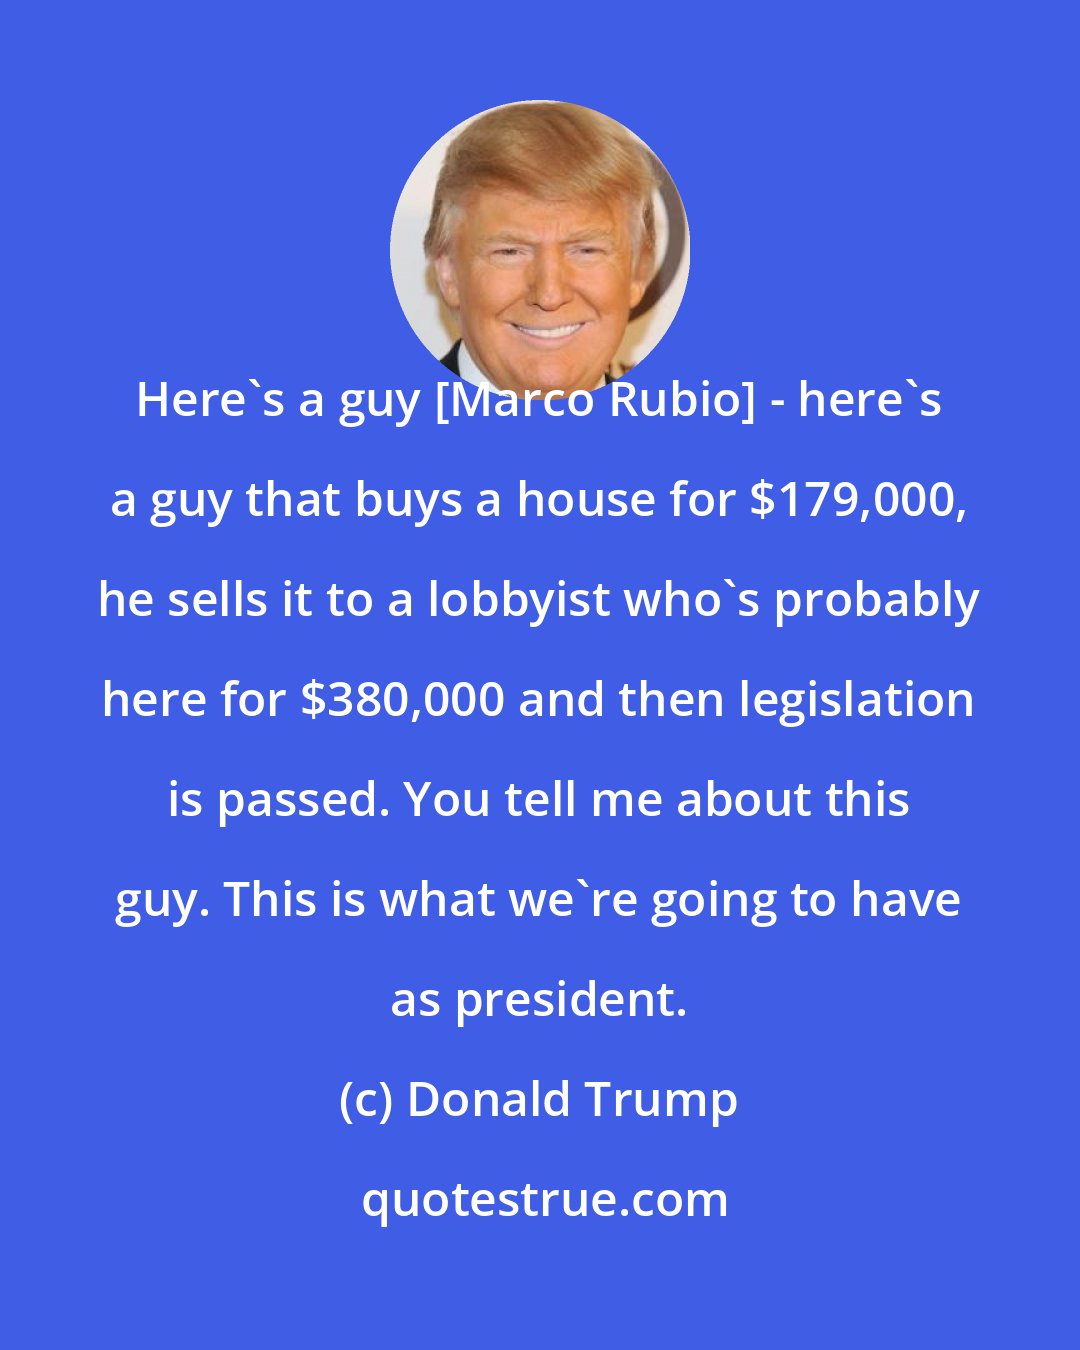 Donald Trump: Here's a guy [Marco Rubio] - here's a guy that buys a house for $179,000, he sells it to a lobbyist who's probably here for $380,000 and then legislation is passed. You tell me about this guy. This is what we're going to have as president.